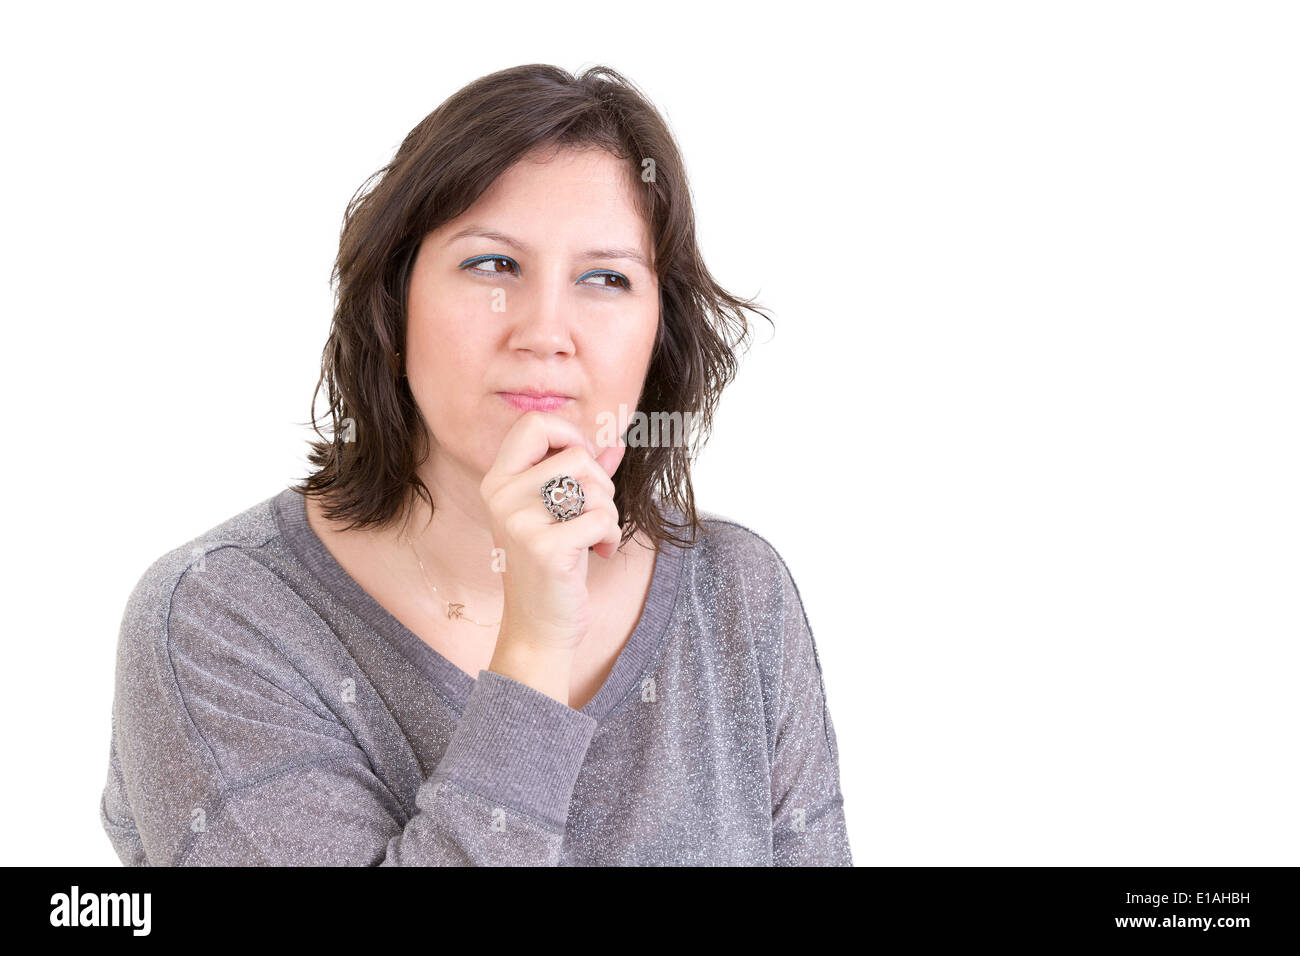 Woman with a calculating pensive look sitting with her hand to her chin as she plans and schemes for the future, isolated on whi Stock Photo